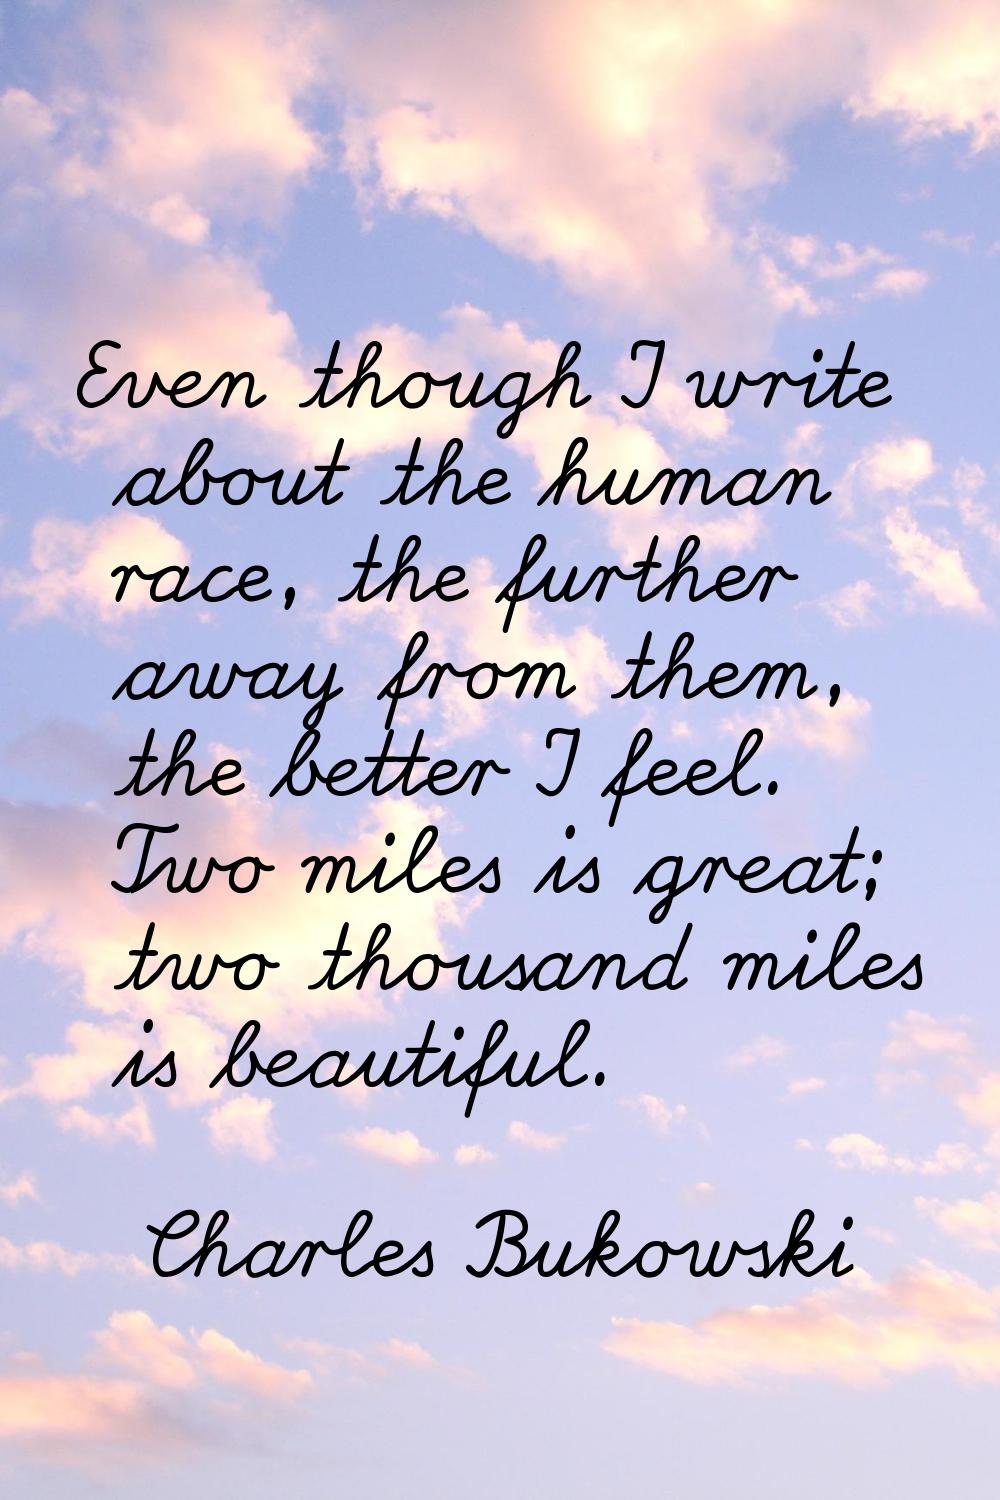 Even though I write about the human race, the further away from them, the better I feel. Two miles 